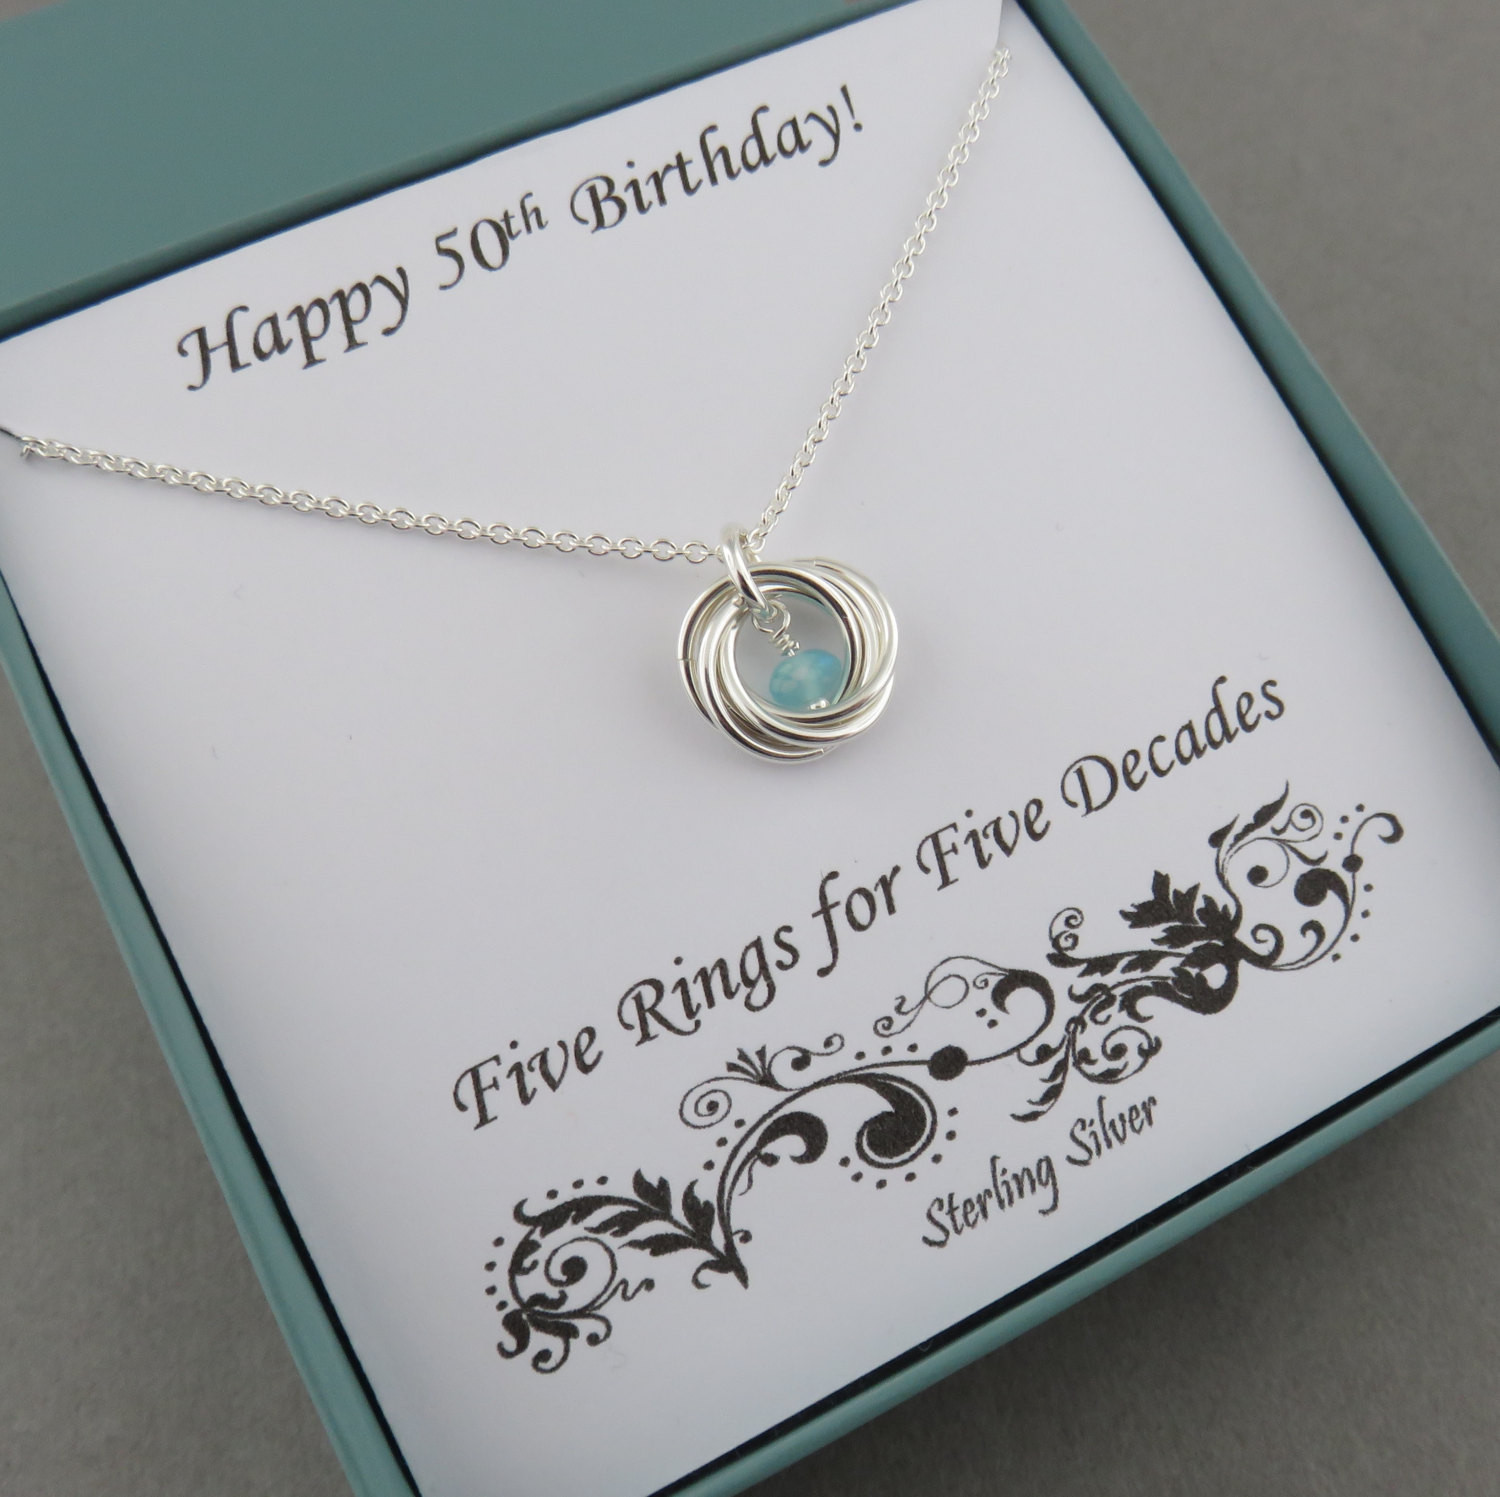 Birthday Gift Ideas For A Woman
 50th Birthday Gift for Women Birthstone Necklace Sterling